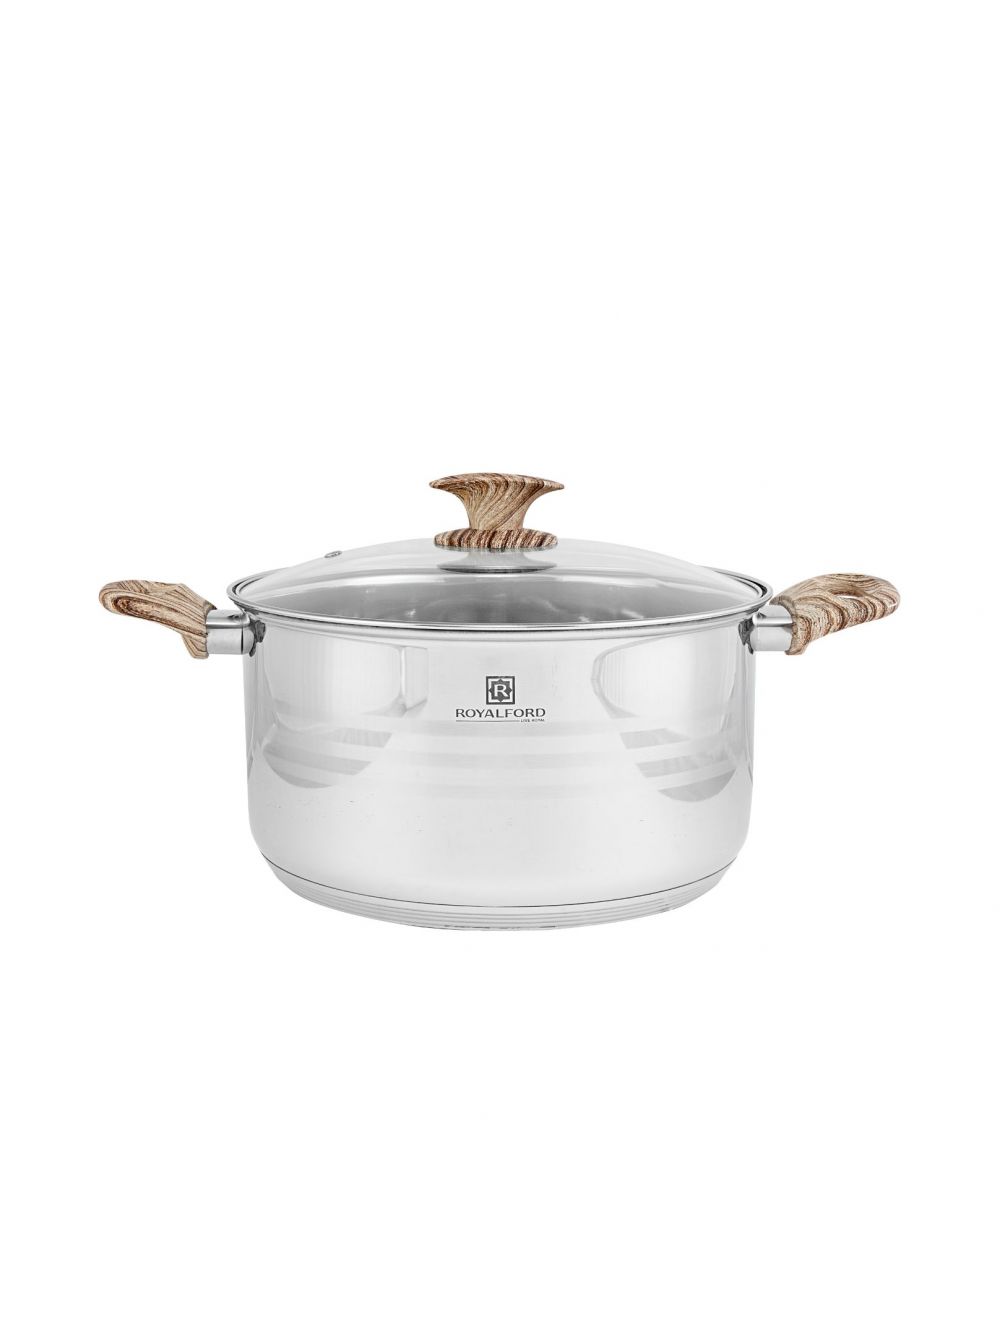 Royalford RF8546 20cm Stainless Steel Casserole with Glass Lid